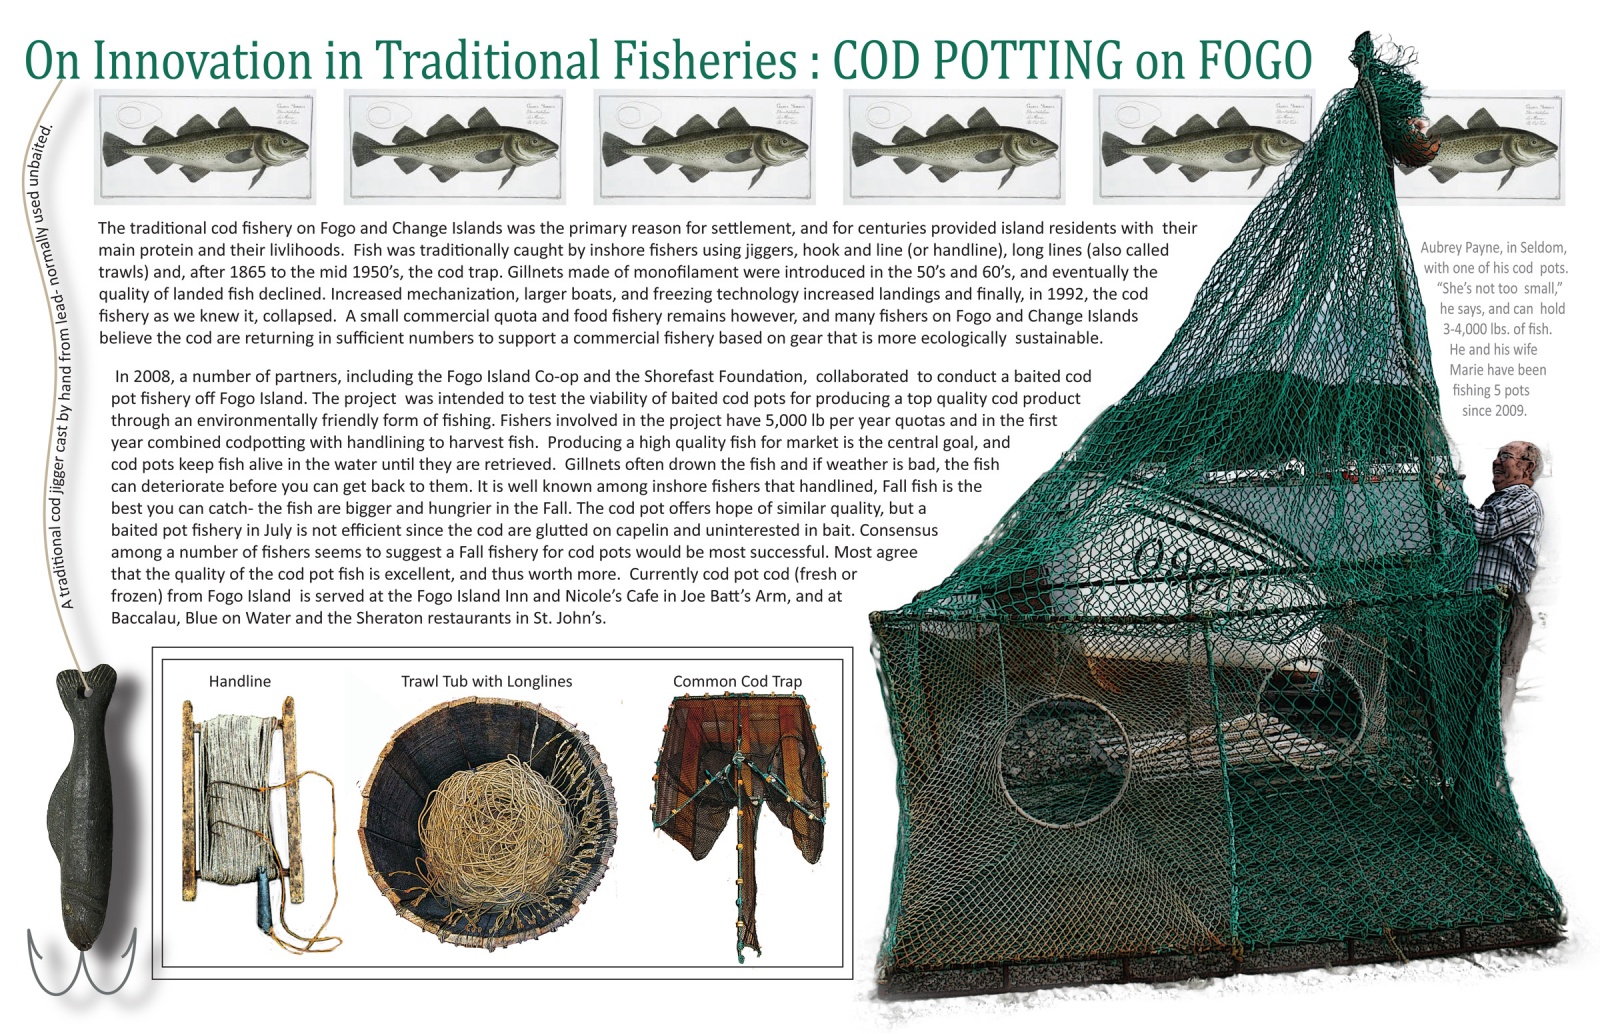 On Innovation in Traditional Fisheries: Cod Potting on Fogo